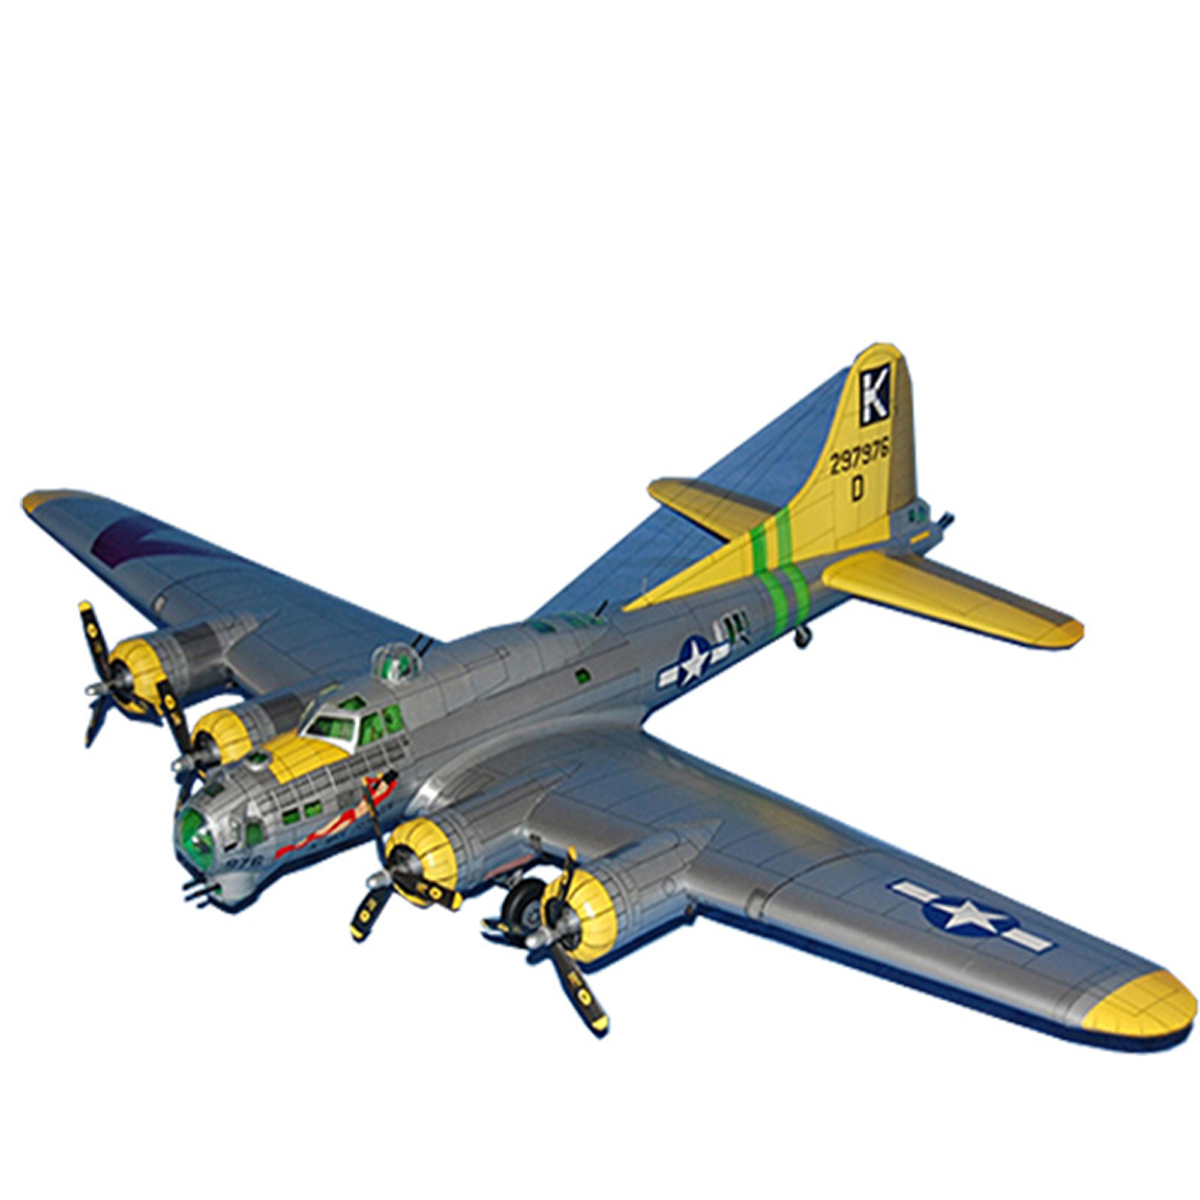 

1:47 Scale Boeing B-17 Flying Fortress Heavy Bomber Handcraft Paper Model Kit Education Toys